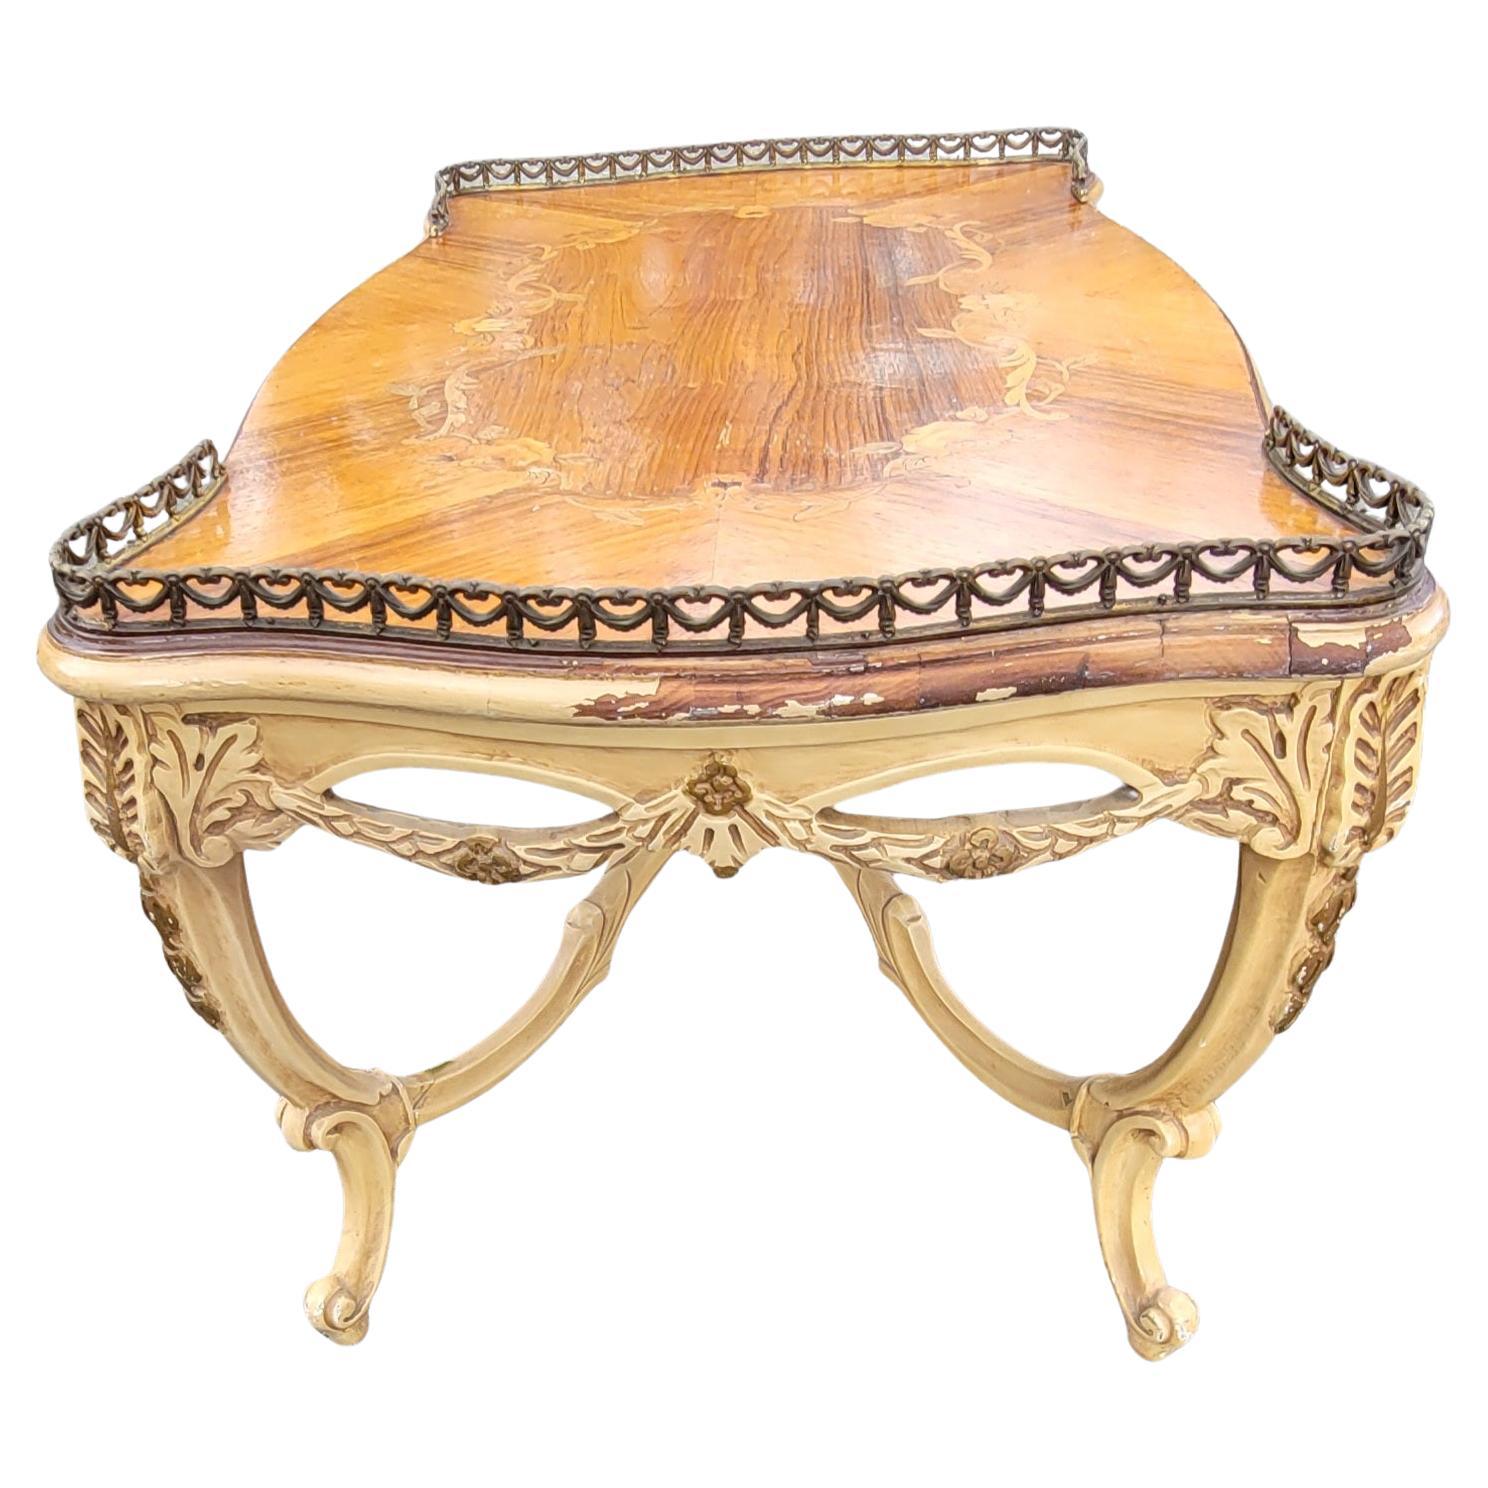 1910s Louis XV Walnut & Kingwood Marquetry Satinwood Inlaid Cocktail Table For Sale 1